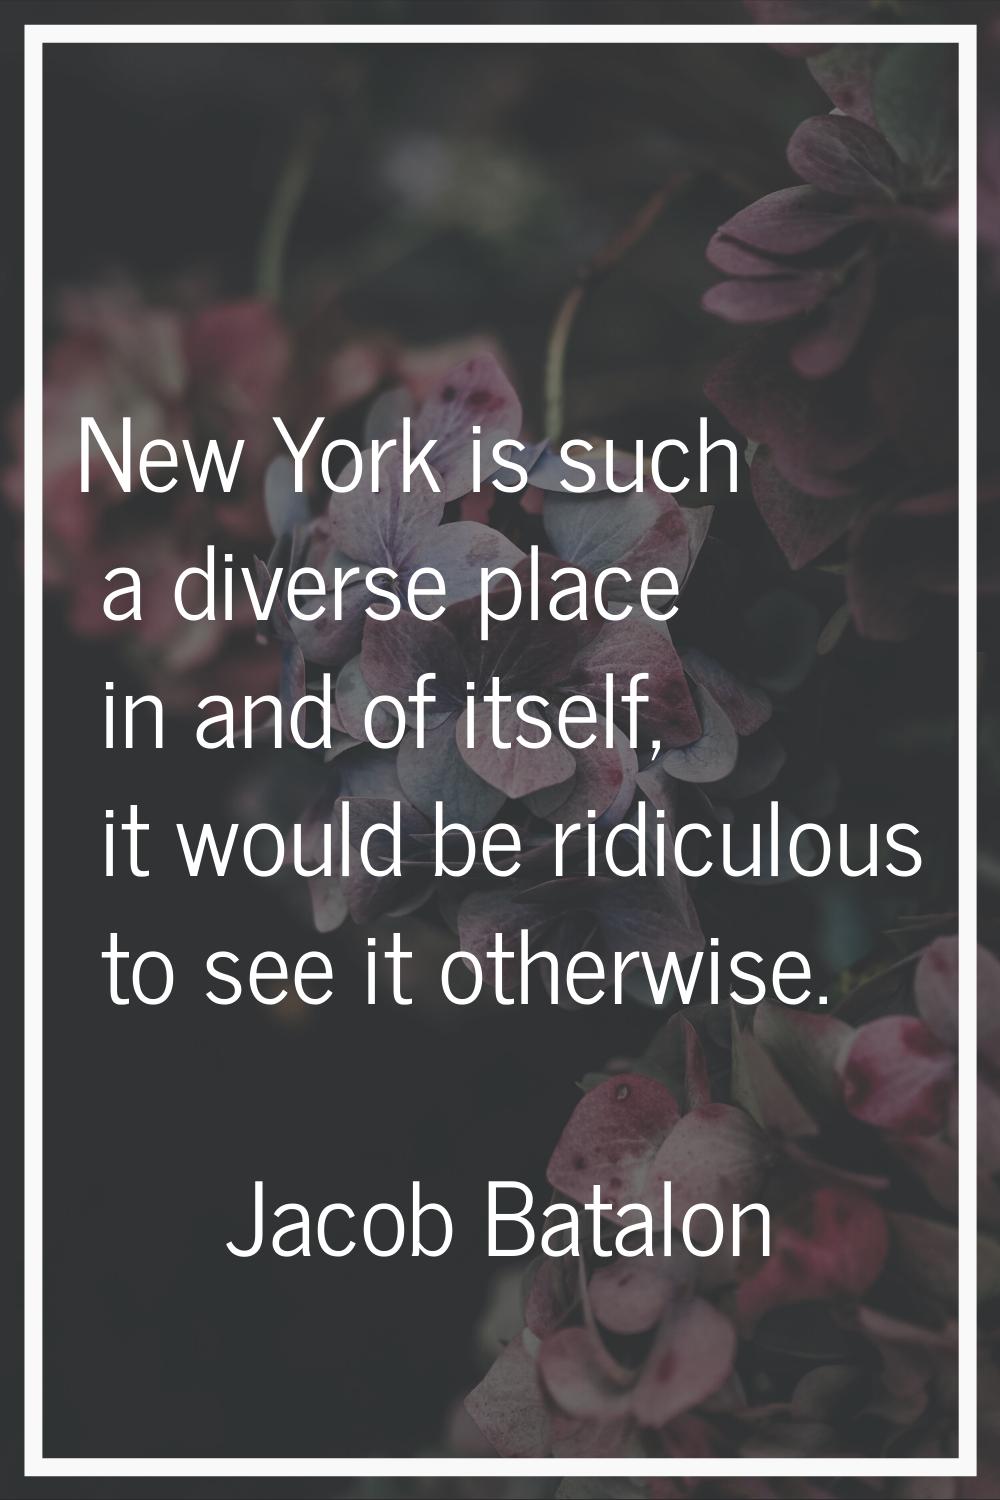 New York is such a diverse place in and of itself, it would be ridiculous to see it otherwise.